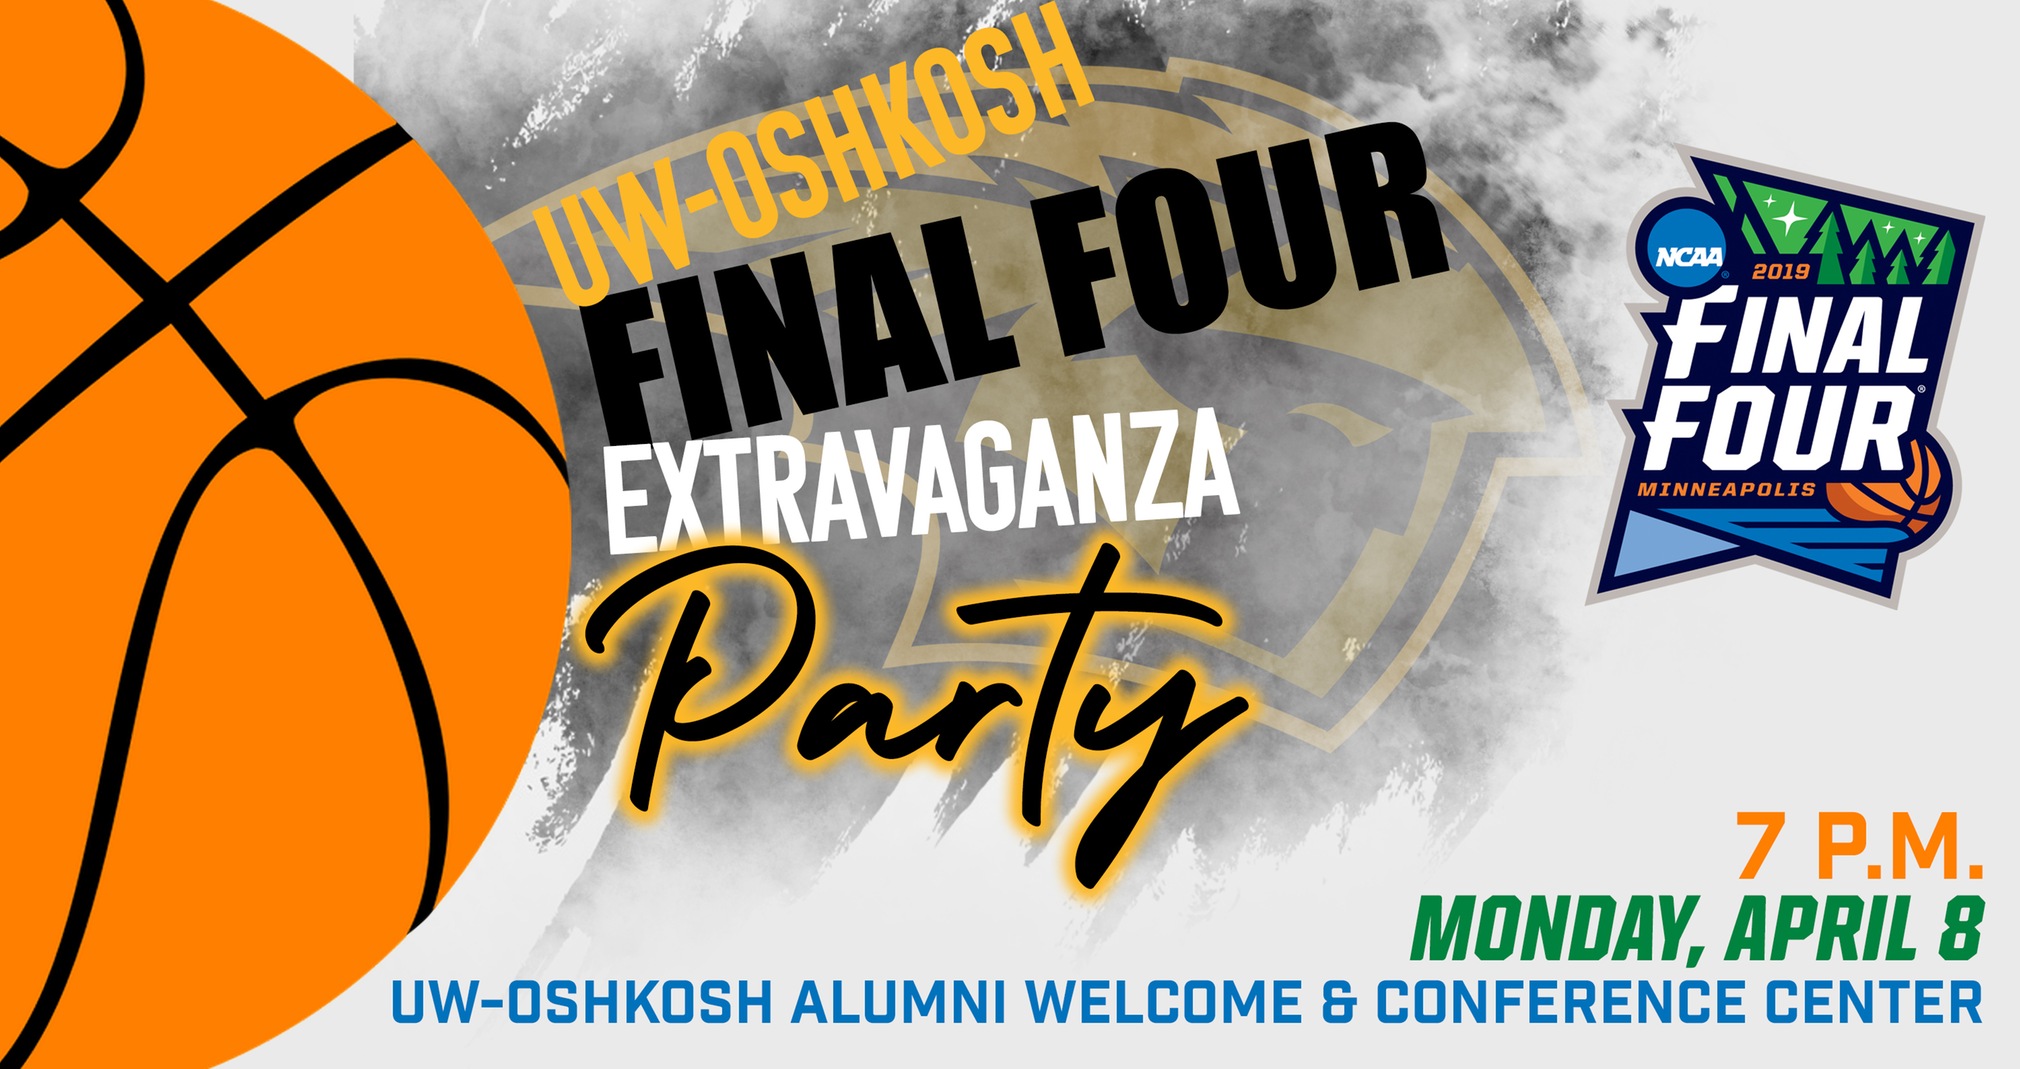 Tickets Still Available For UW-Oshkosh Final Four Extravaganza Party